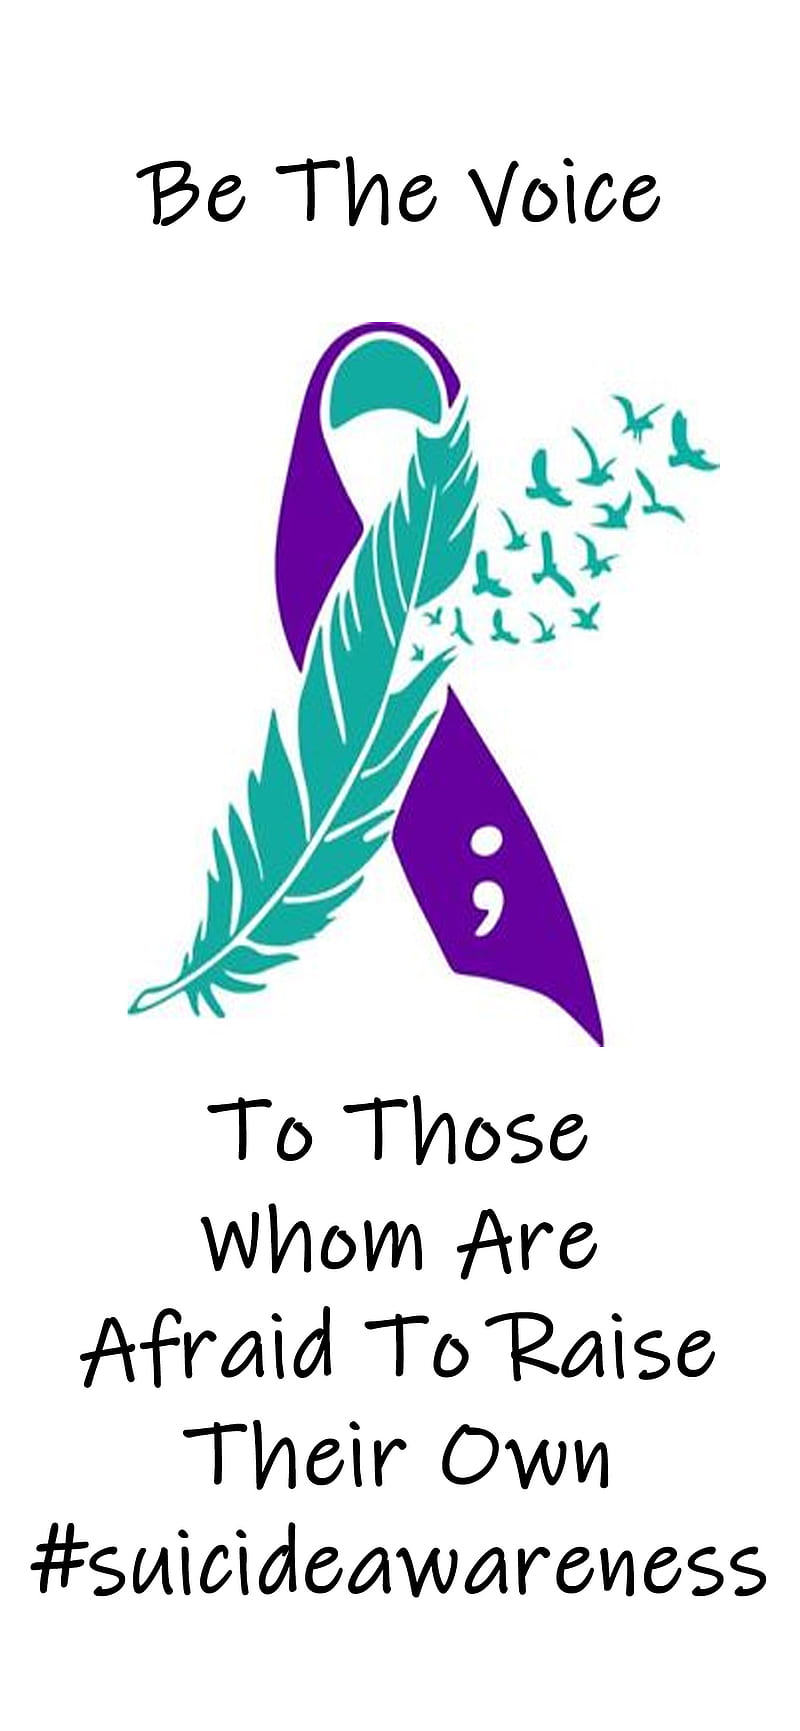 Suicide Awareness, birds, feather, hashtag, hashtags, prevention, purple, ribbon, sayings, teal, HD phone wallpaper